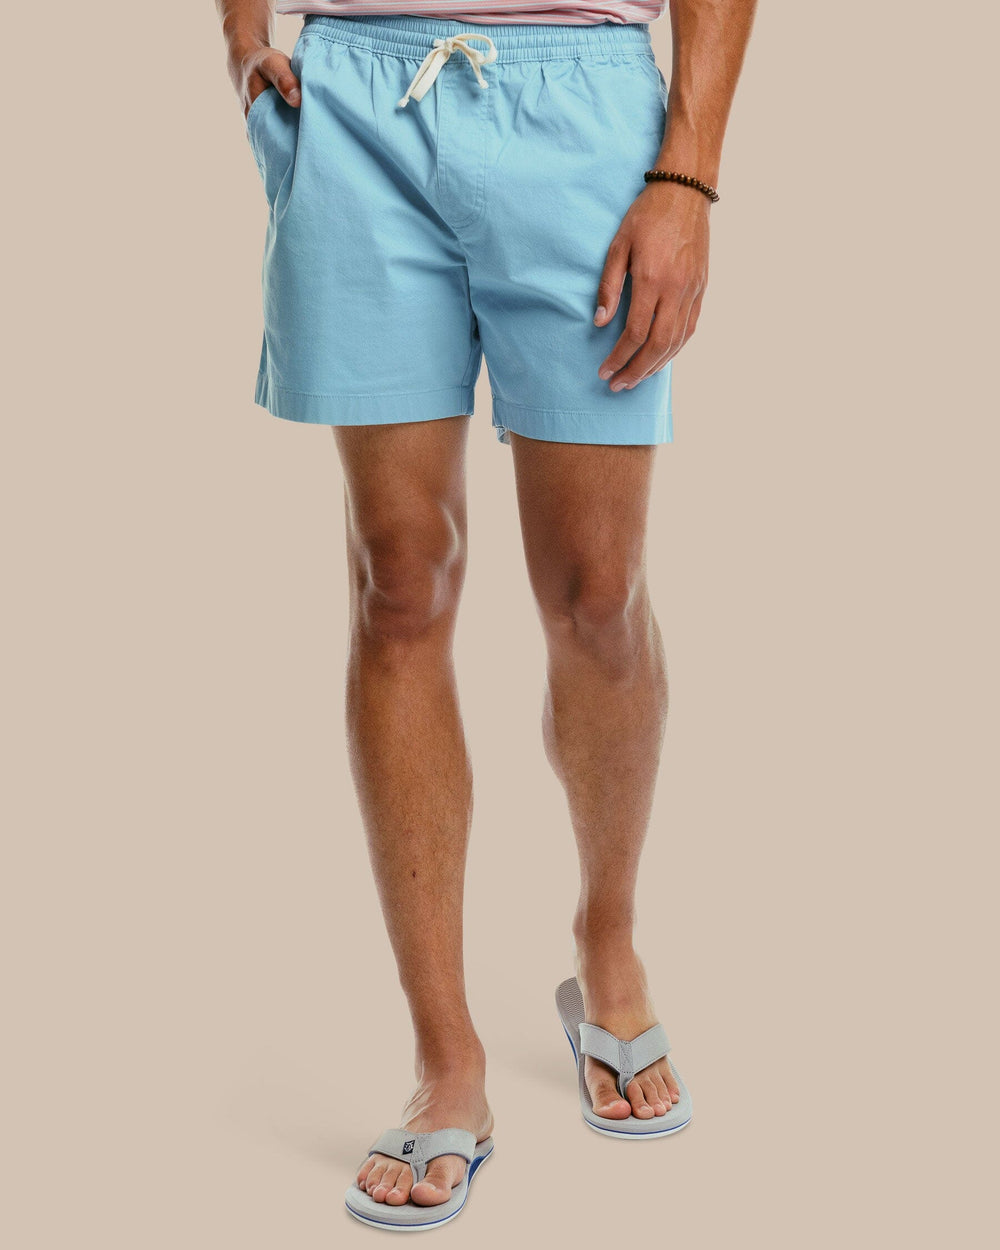 The model front view of the Sun Farer 6 inch short - Ocean Teal